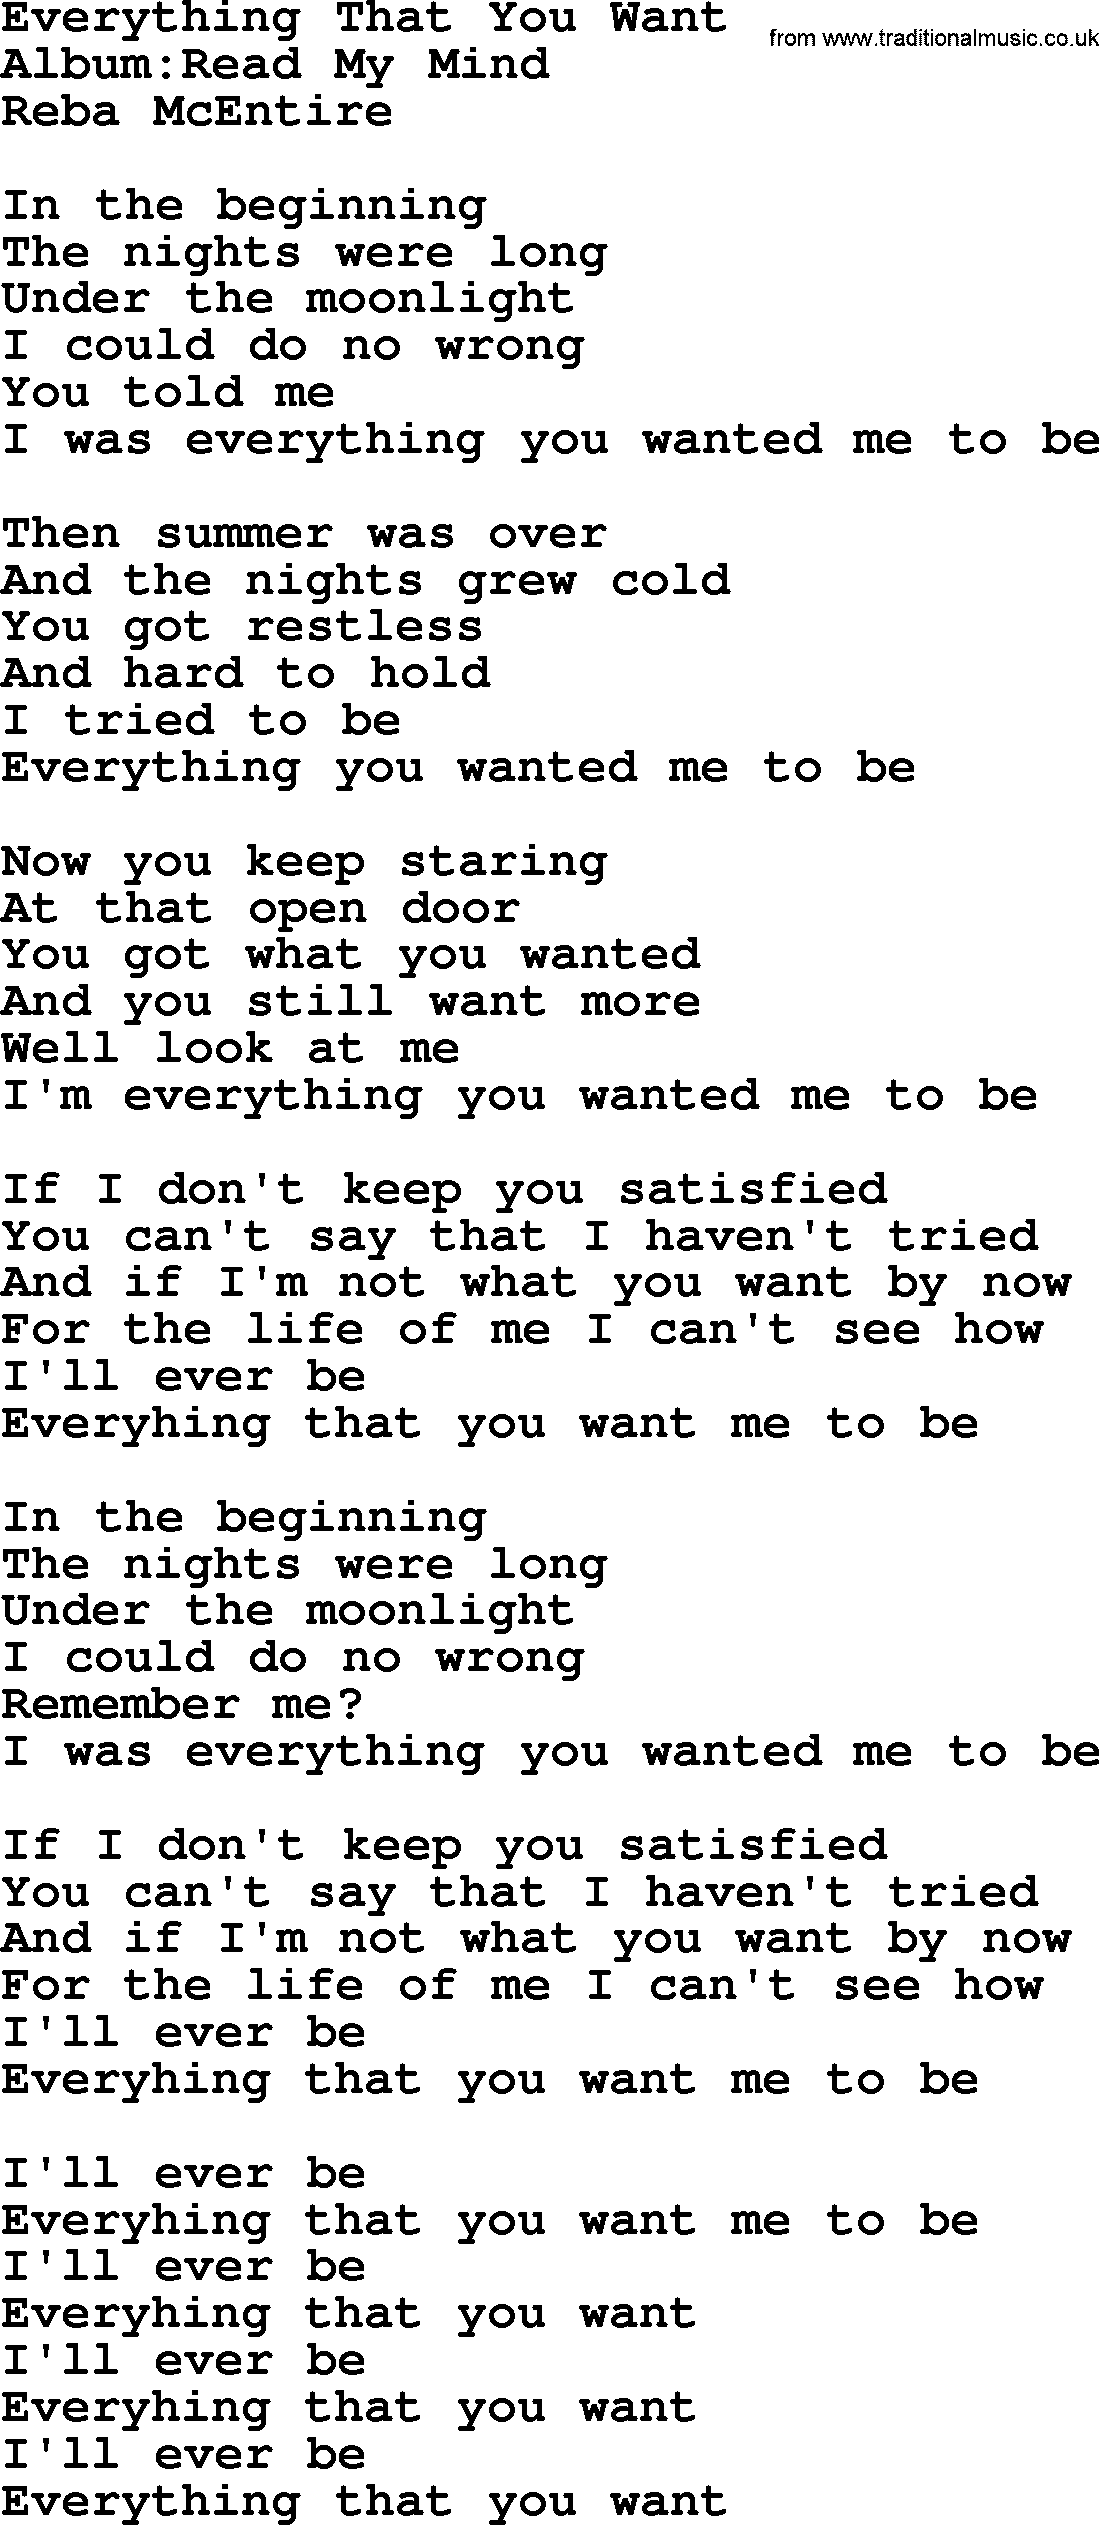 Reba McEntire song: Everything That You Want lyrics